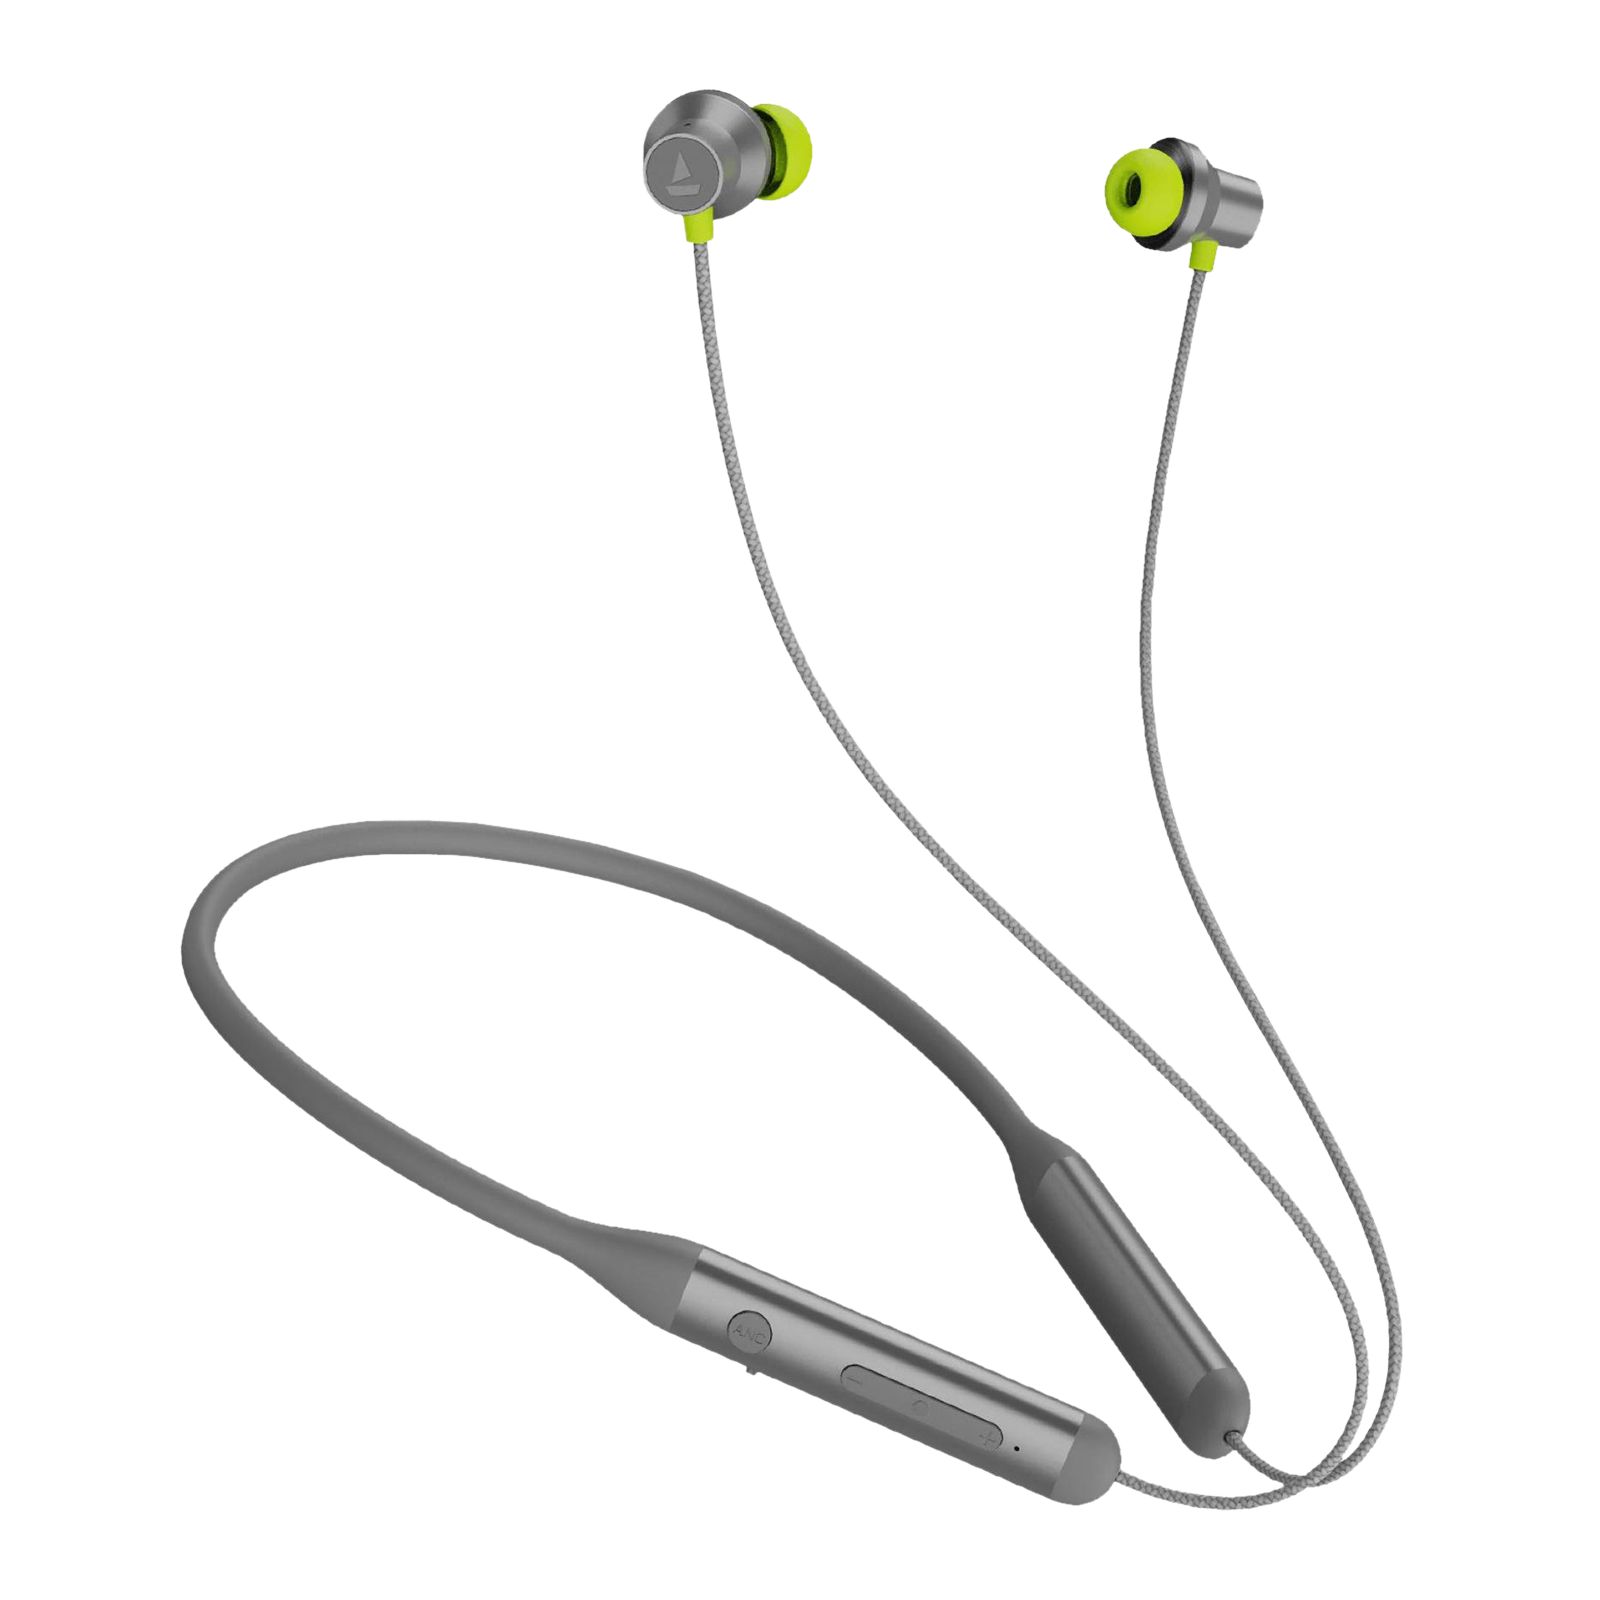 boAt Rockerz 333 Neckband with Active Noise Cancellation (IPX4 Water Resistance, Sweatproof, DIRAC Opteo Technology, Moon Grey)